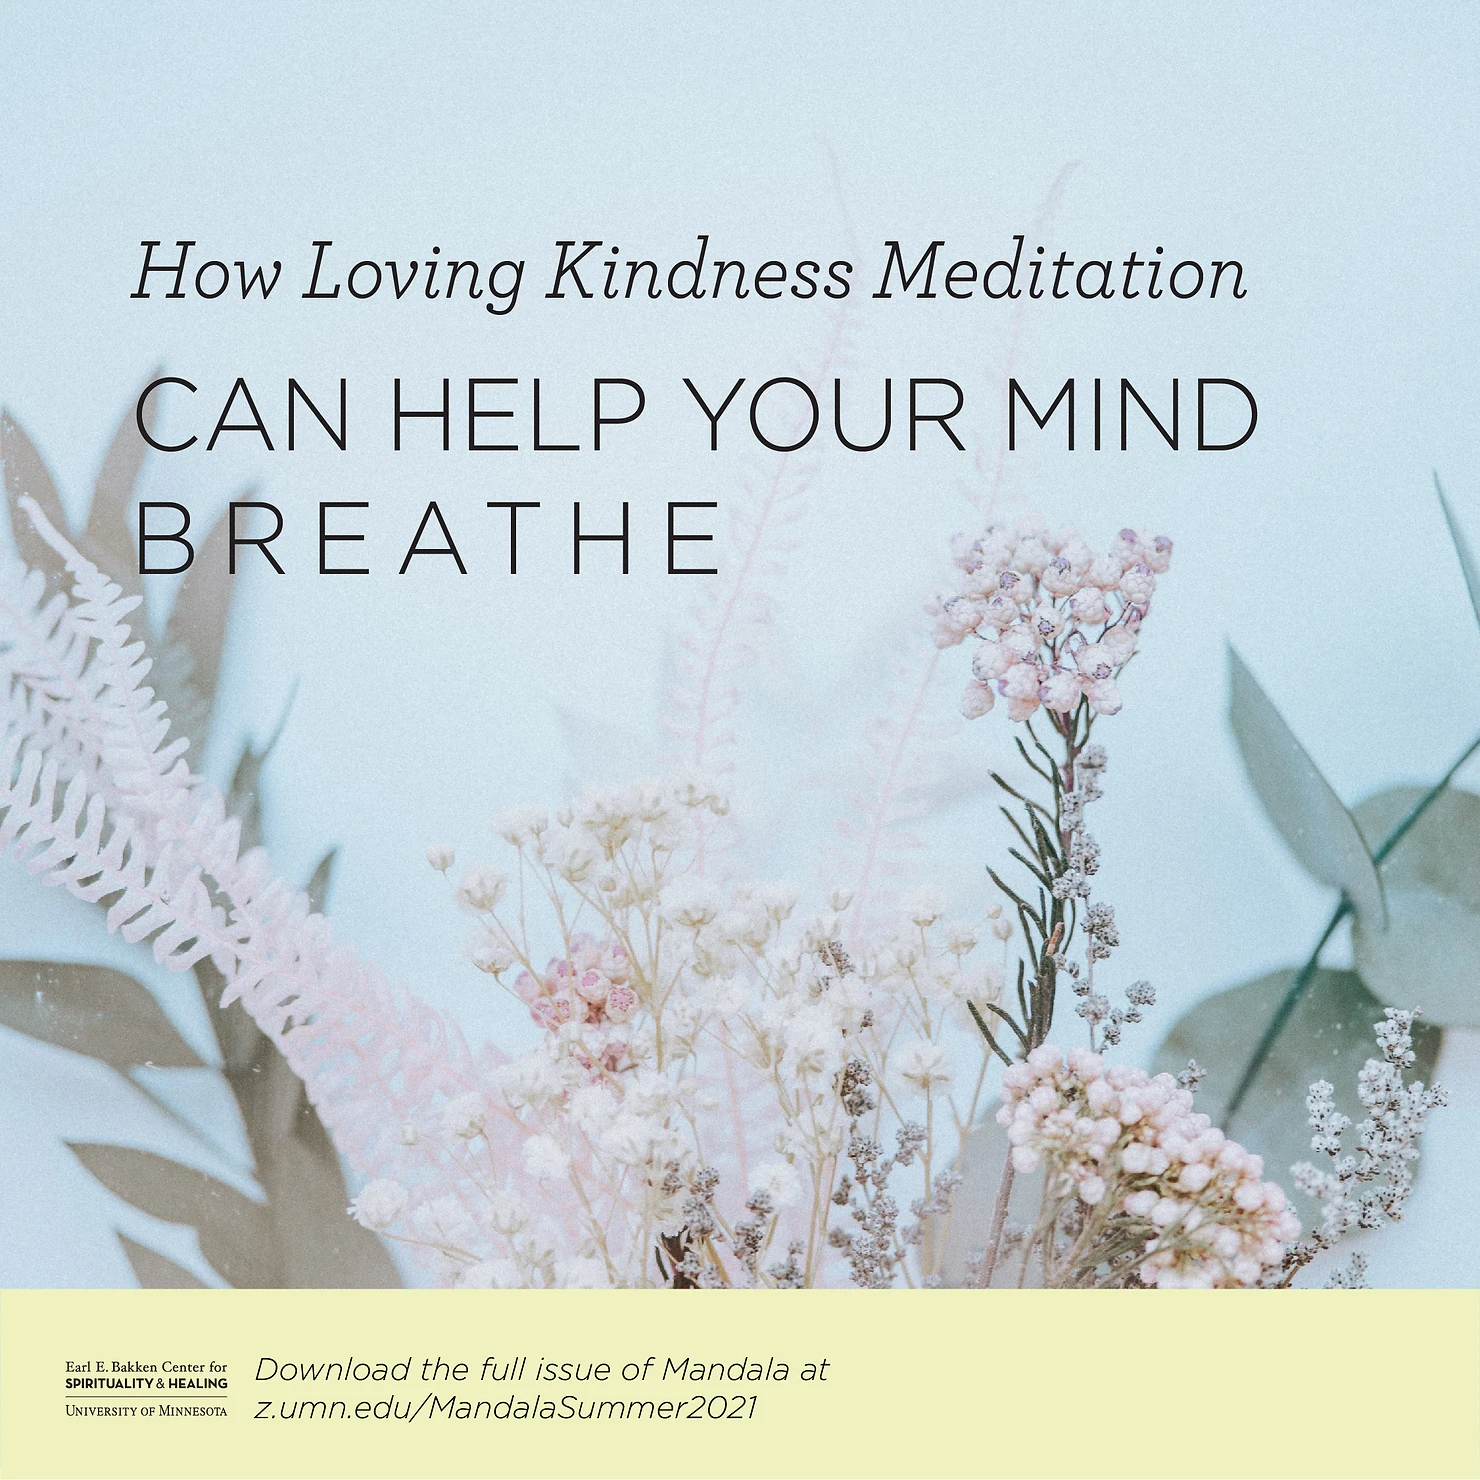 "How Loving Kindness Can Help Your Mind Breathe" text over a background image of a bouquet of flowers